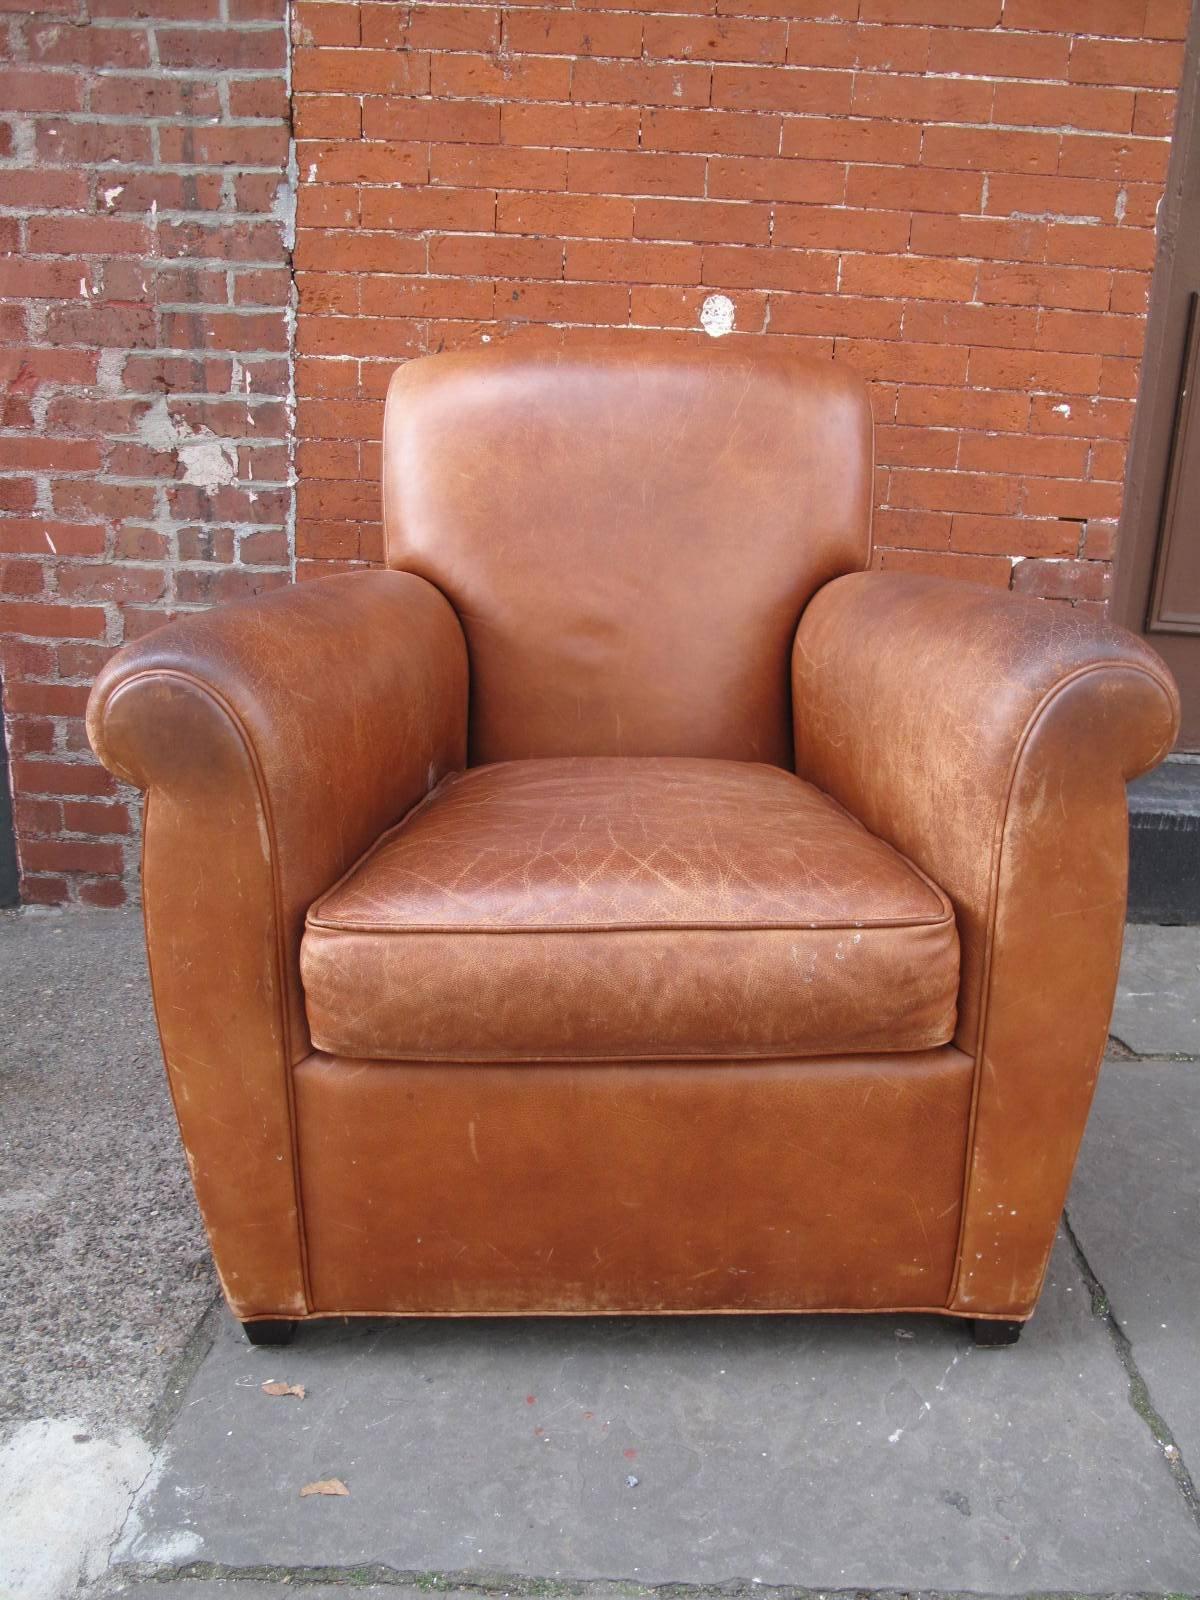 20th century American armchair in coach leather. Manufactured by Baker Furniture.